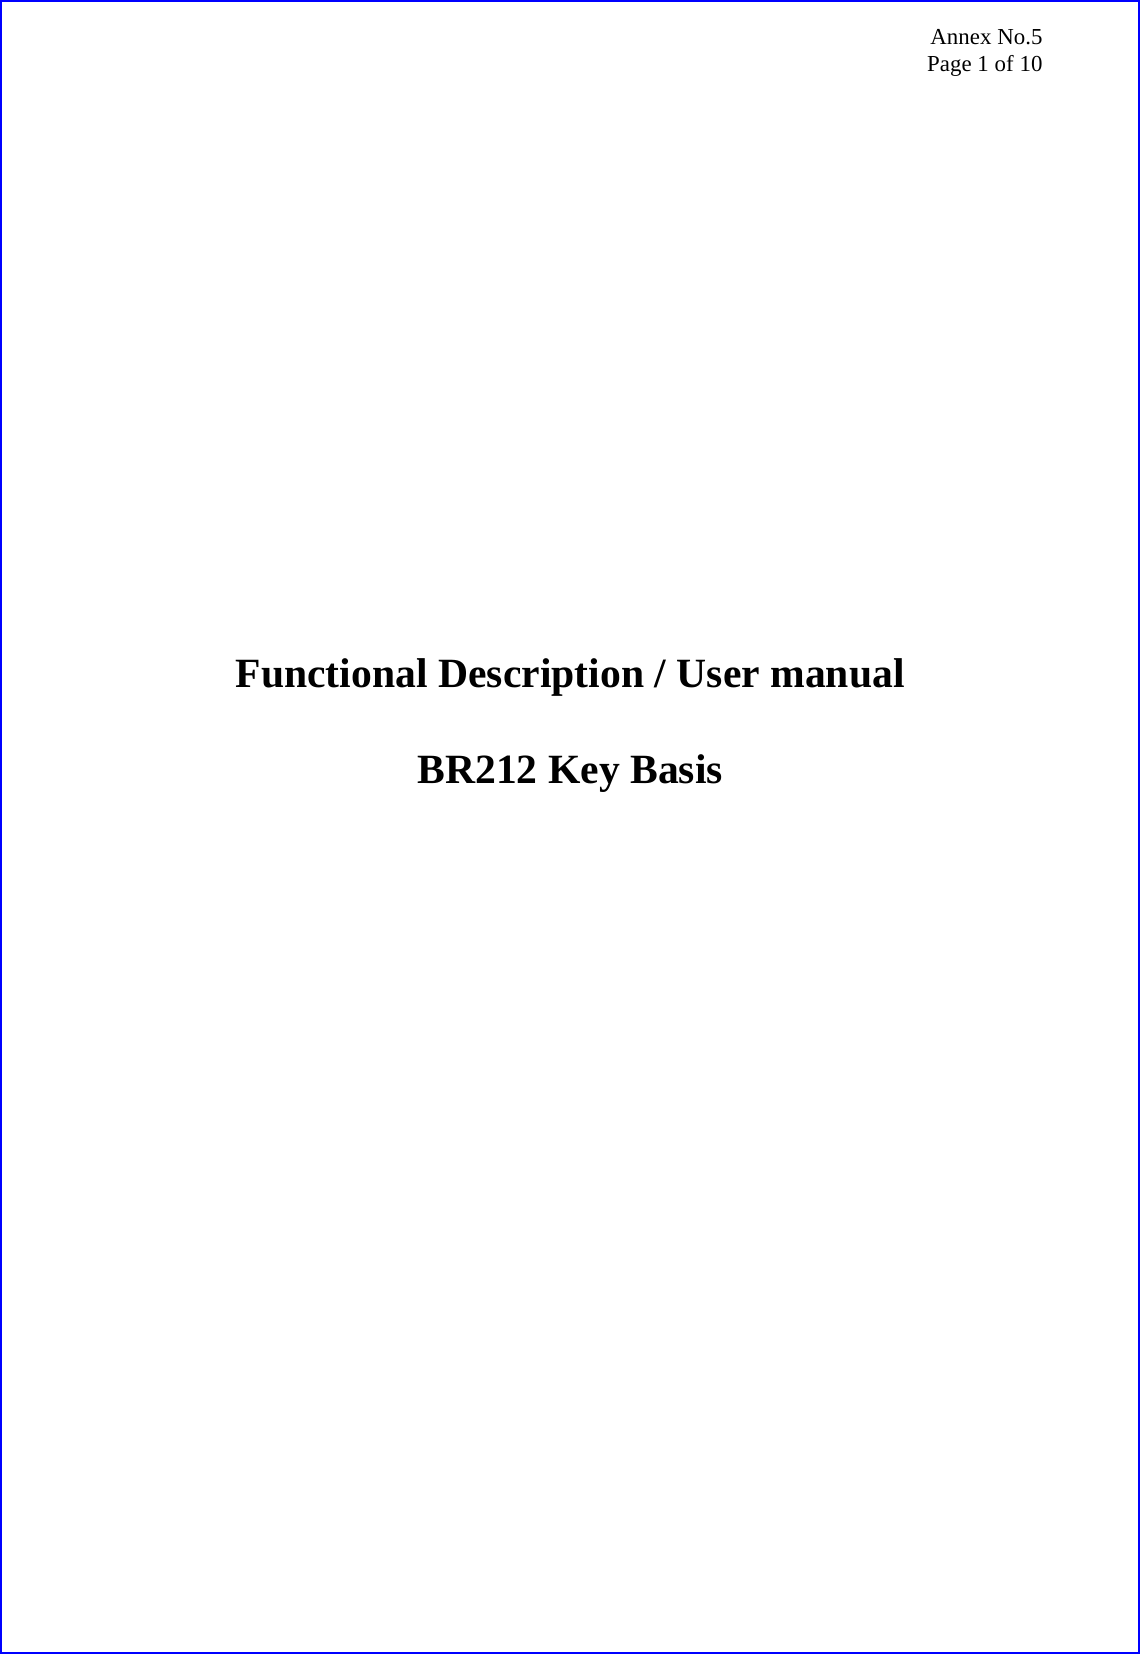 Annex No.5 Page 1 of 10                     Functional Description / User manual  BR212 Key Basis 